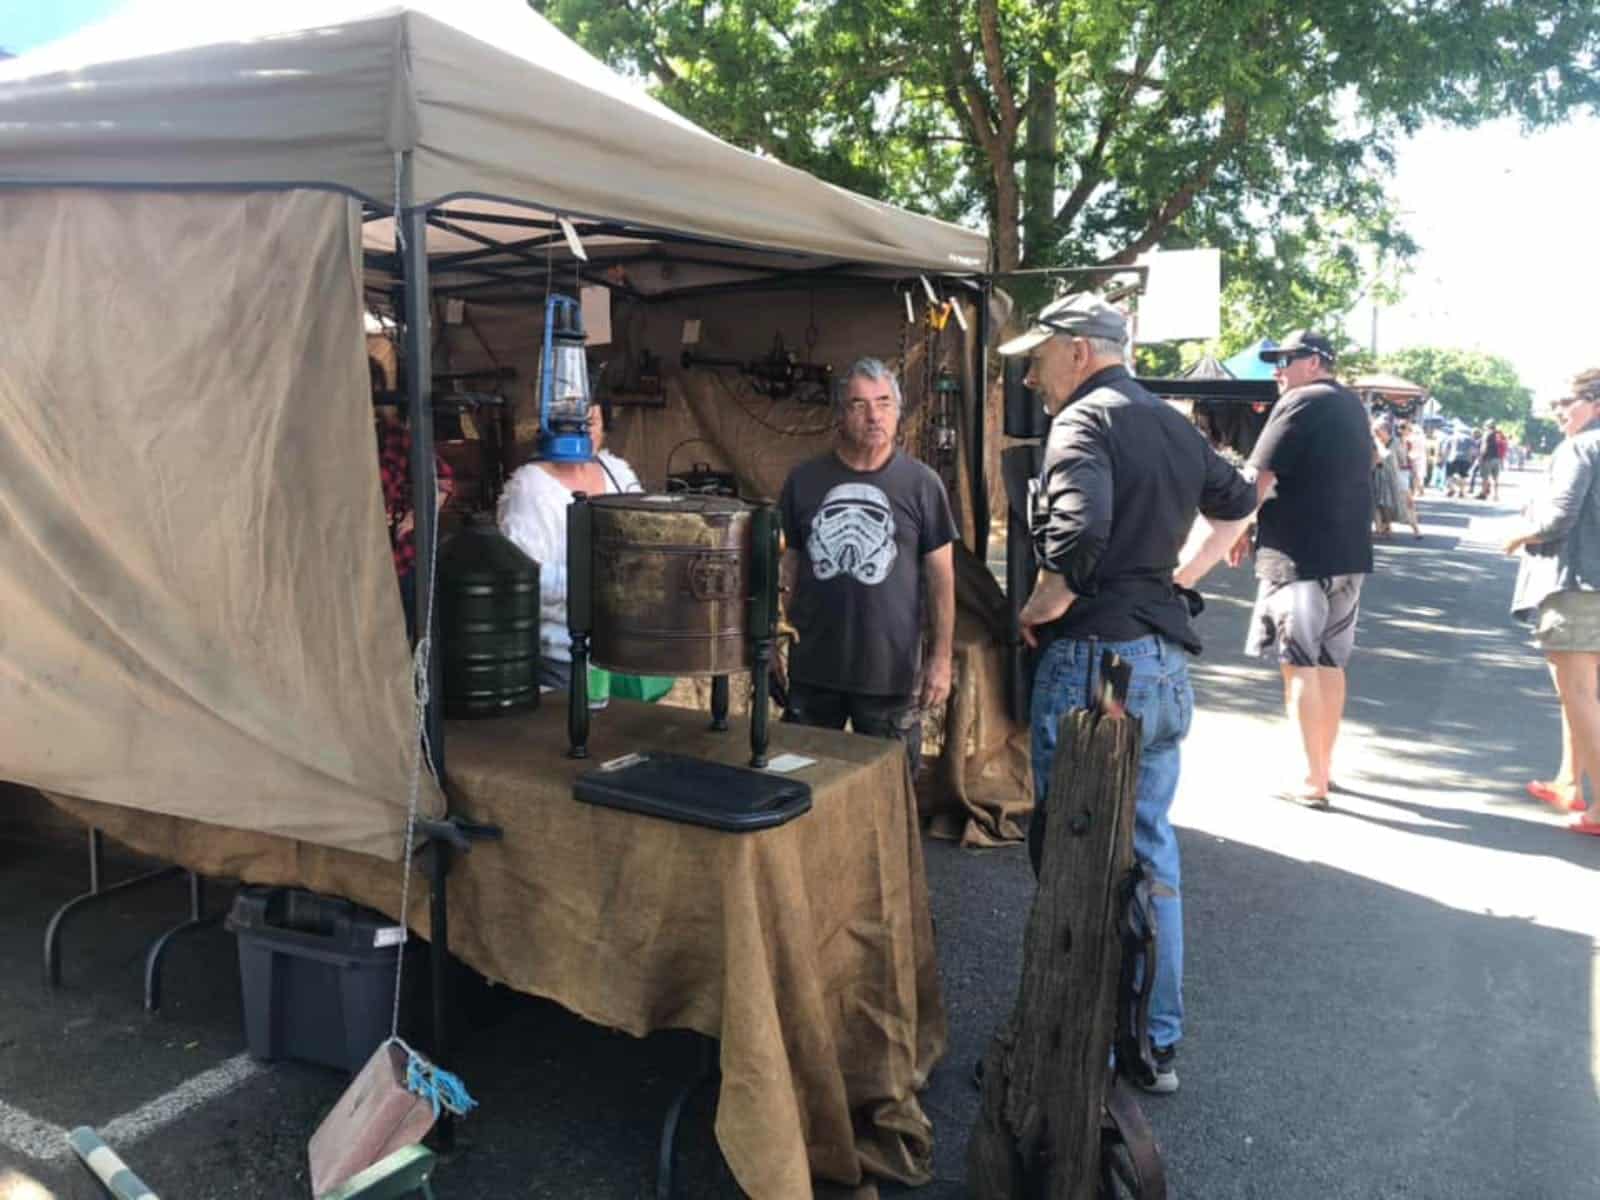 Two men standing outside a steampunk wares stall.